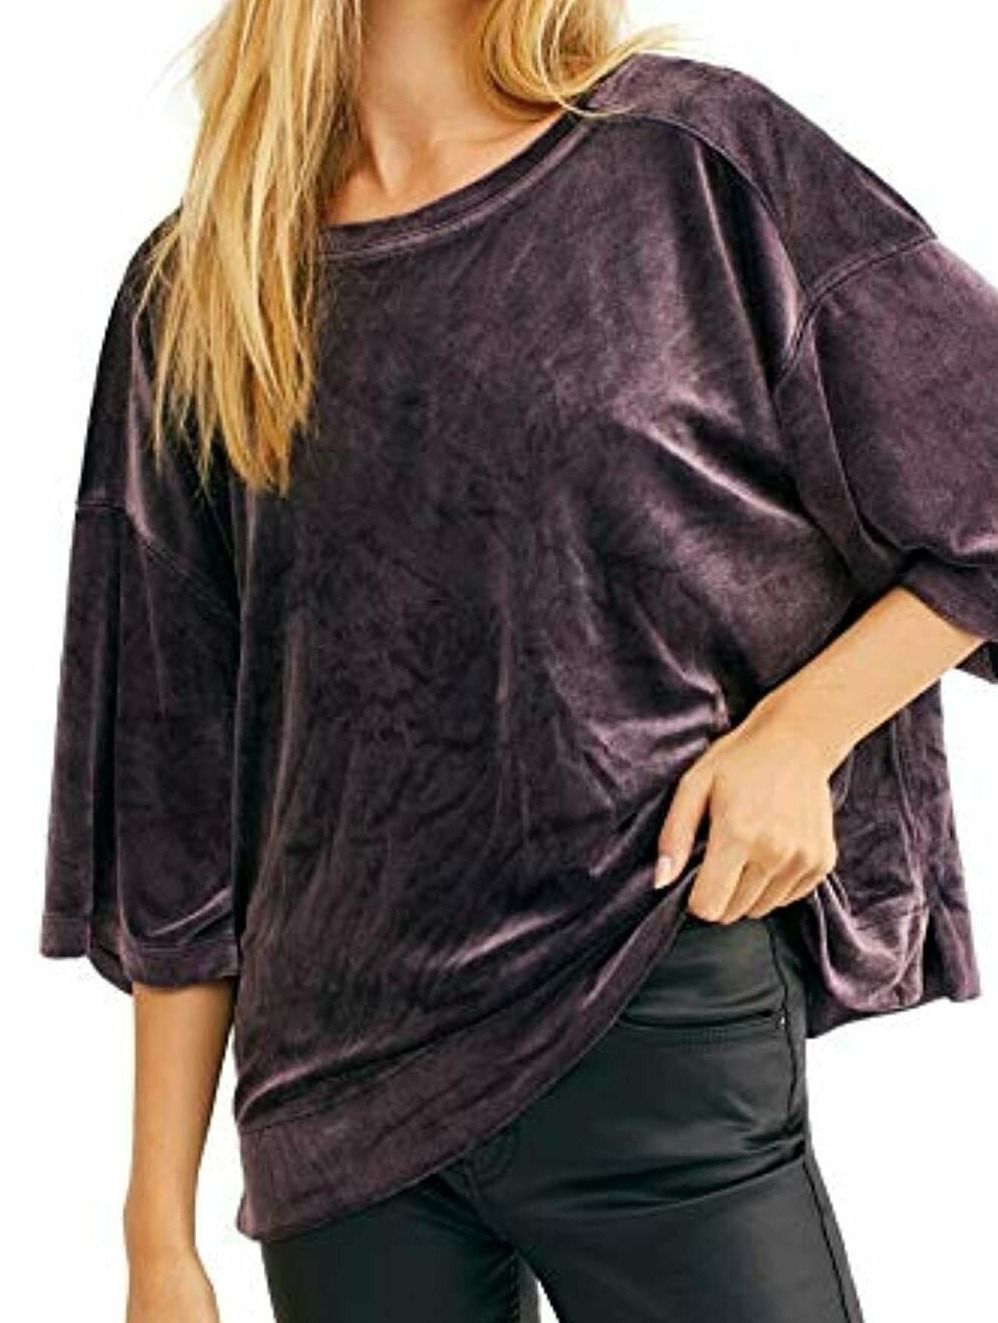 Color: Purples Size Type: Regular Size (Women's): M Sleeve Length: Short Sleeve Type: T-Shirt Style: Knit Top Neckline: Round Neck Pattern: Solid Theme: Outdoor Material: Polyester